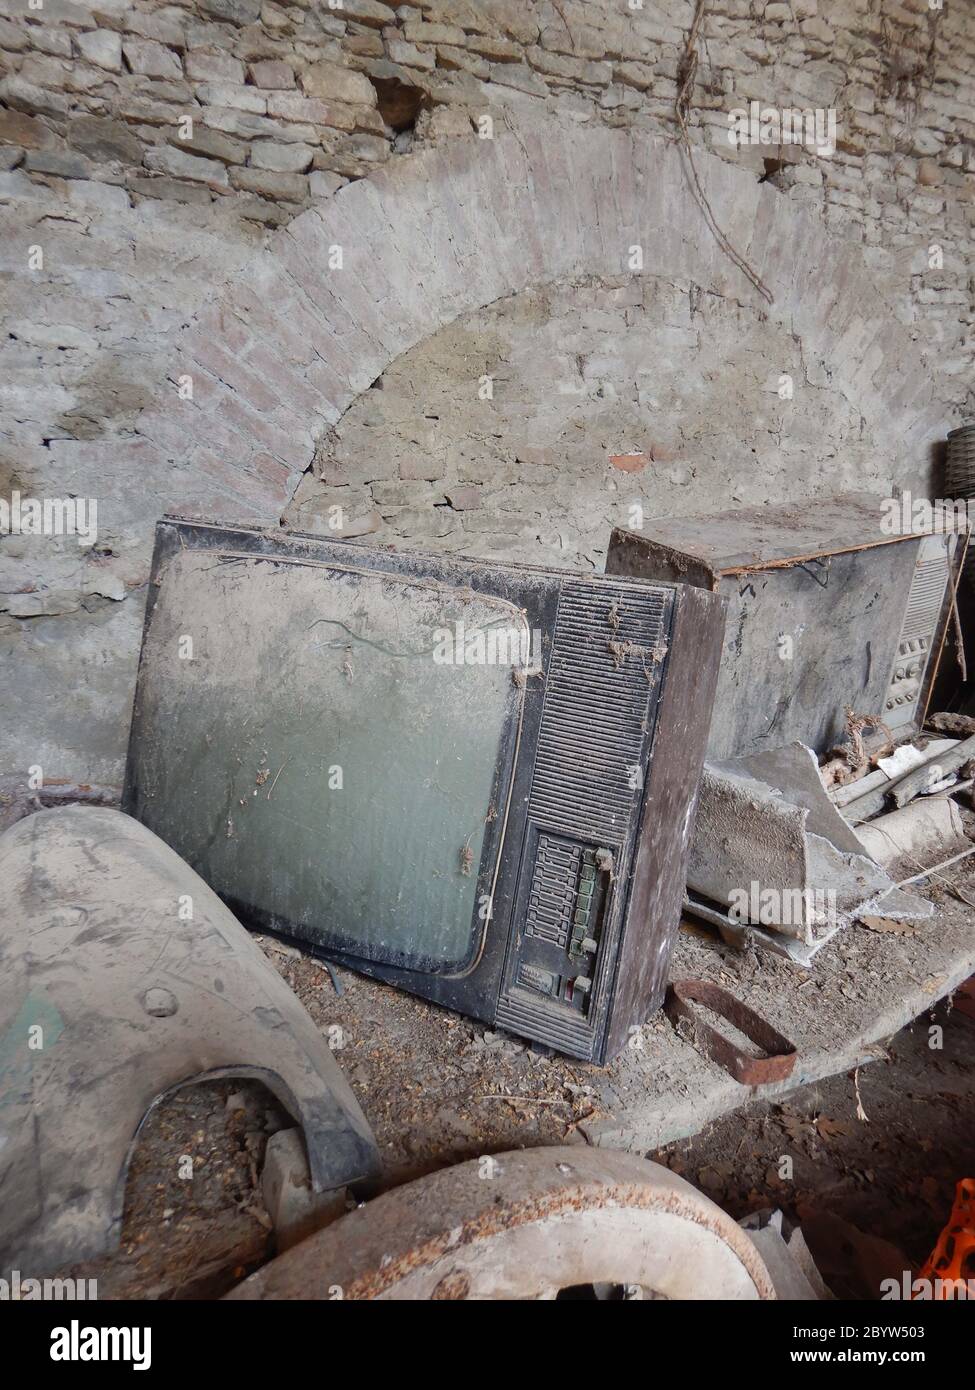 An old television set abandoned and covered in dust Stock Photo